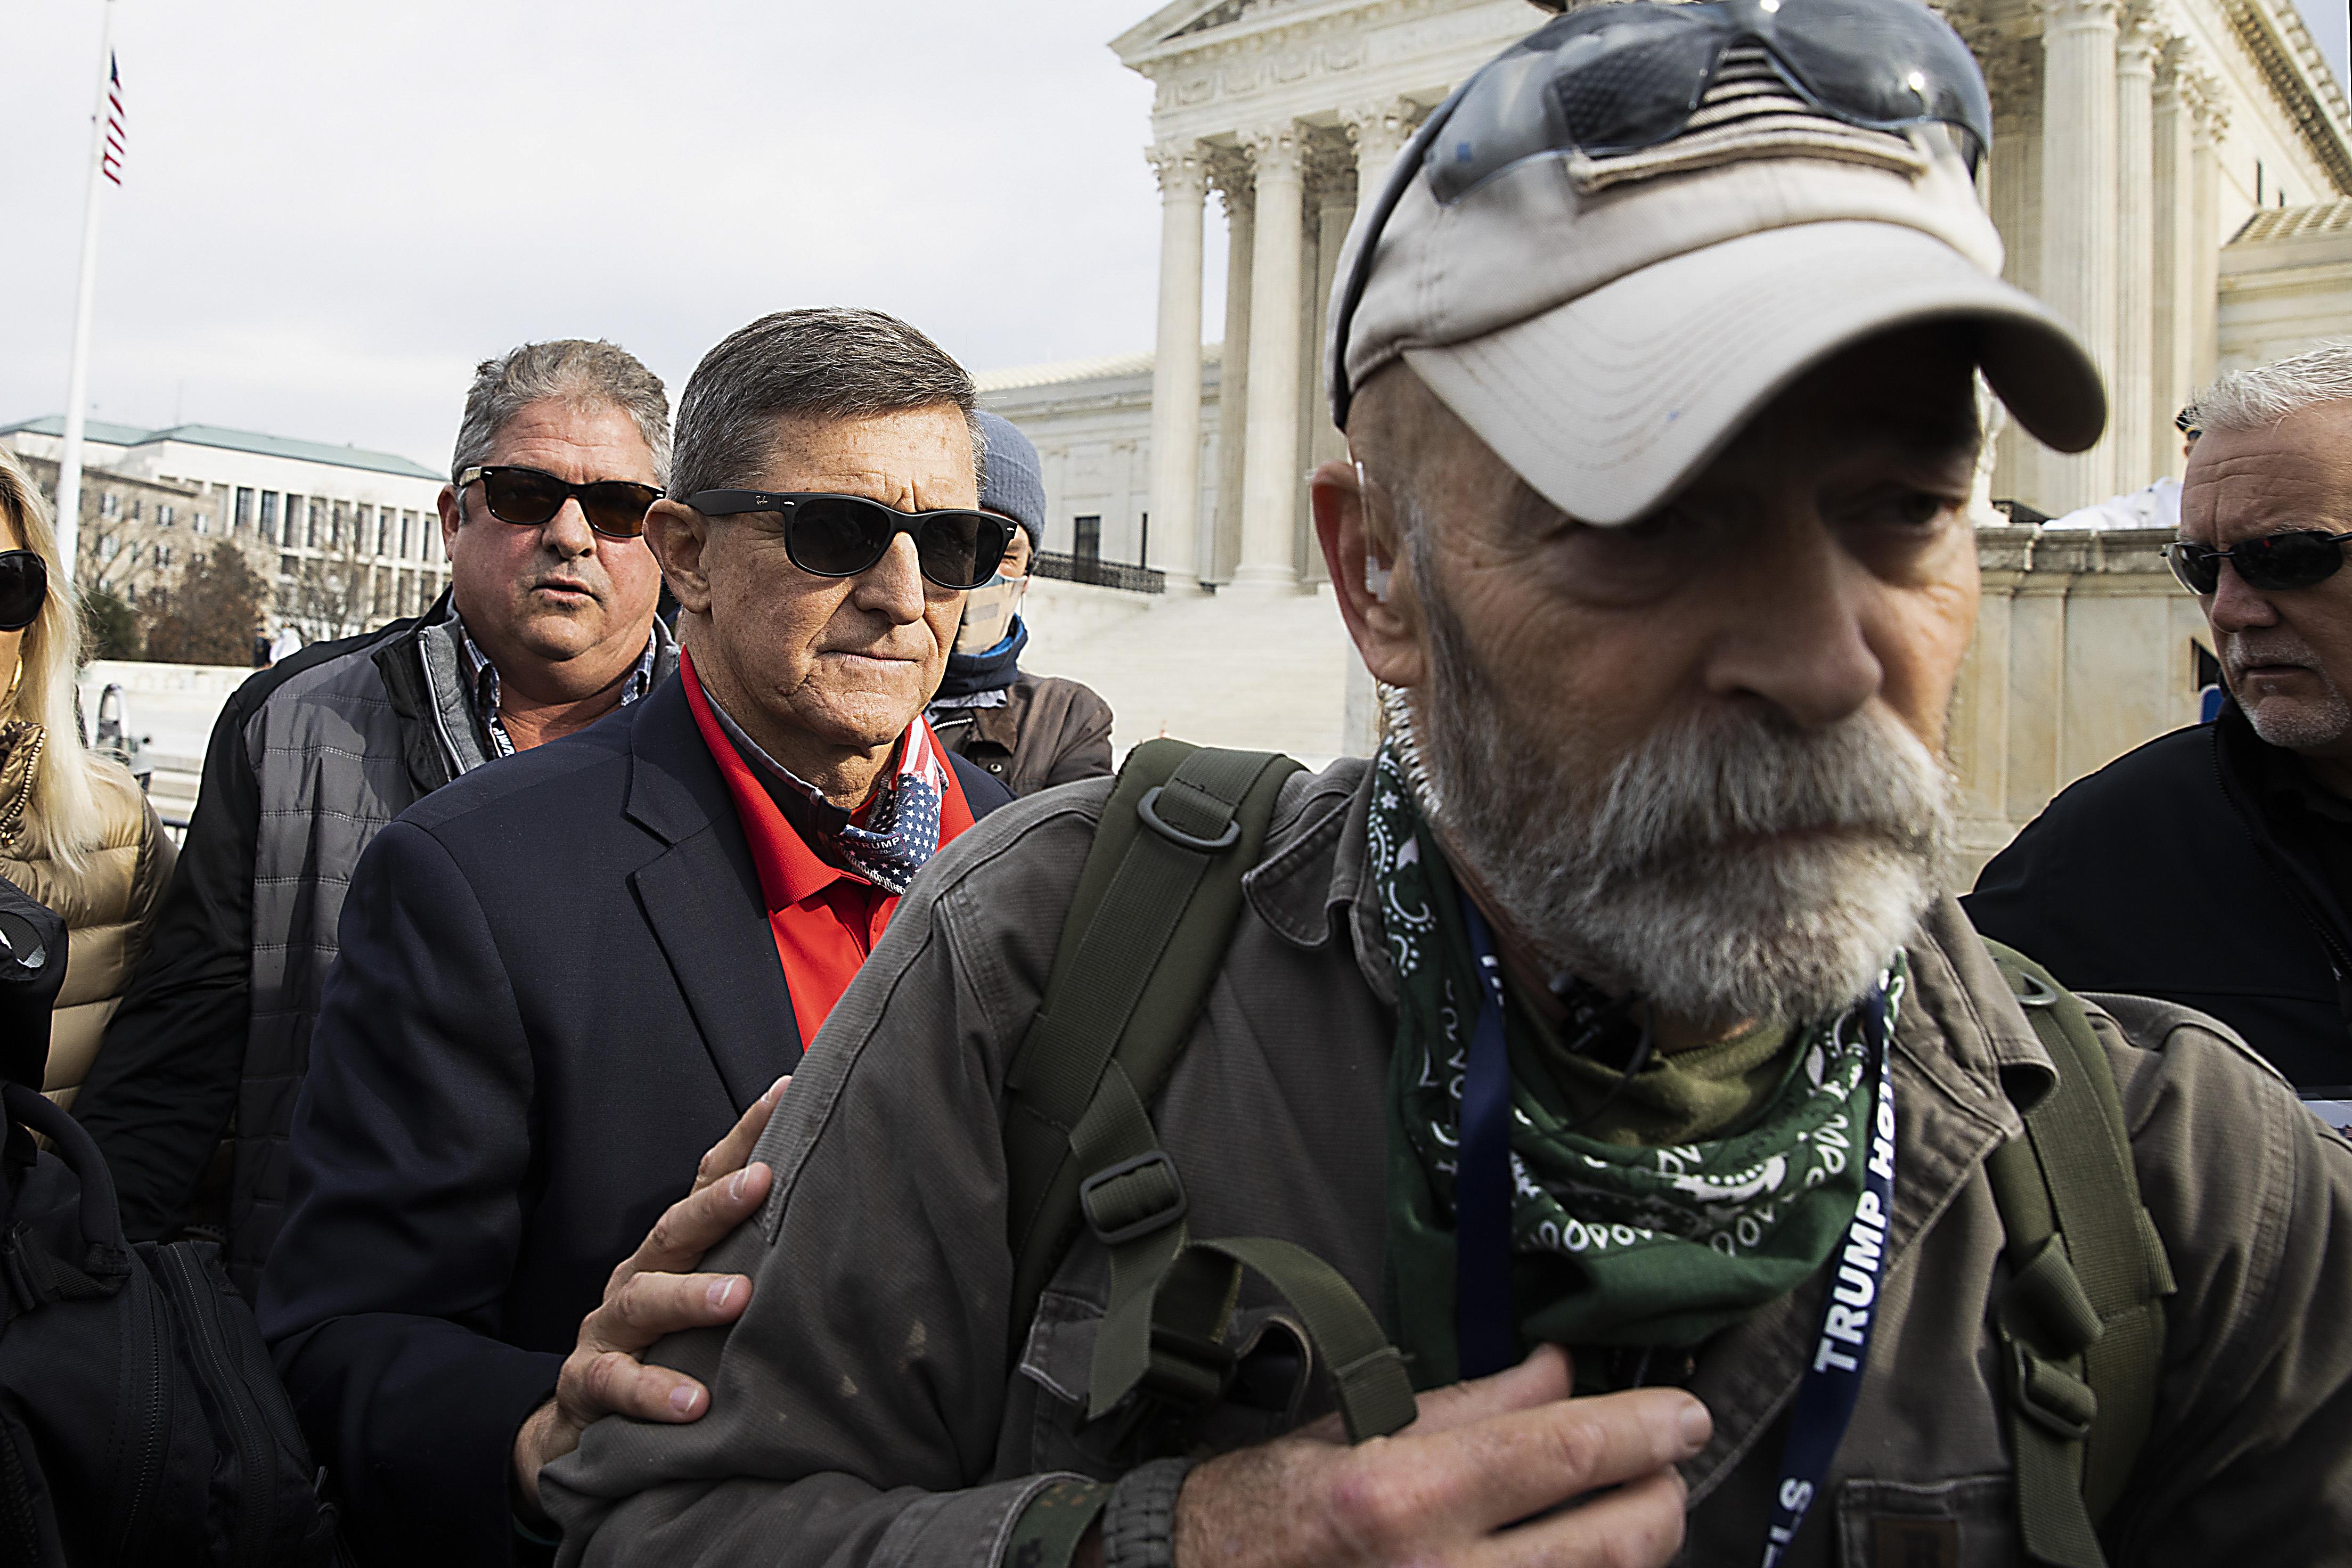 Michael Flynn standing in a group of protesters. Flynn wears sunglasses and puts his hand on the arm of a man in front of him who is wearing a Trump lanyard.